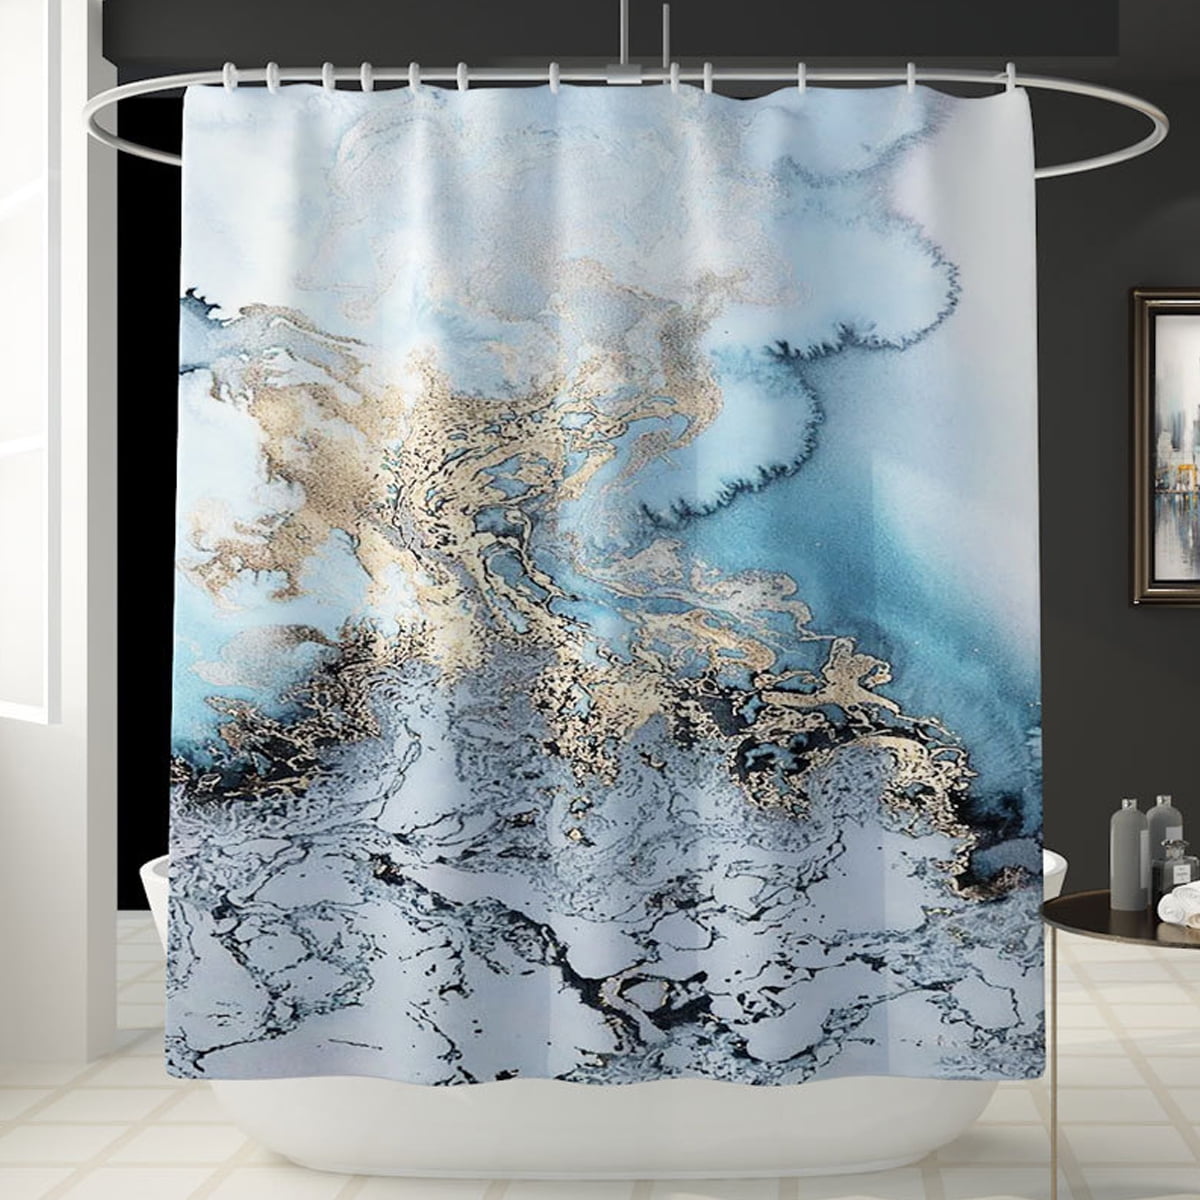 4 Pcs Shower Curtain Set withToilet Lid Cover & Bath Mat & Rug Set, Shower  Curtain with Durable Waterproof Fabric Shower Curtain for Bathroom Hotel  Decor 